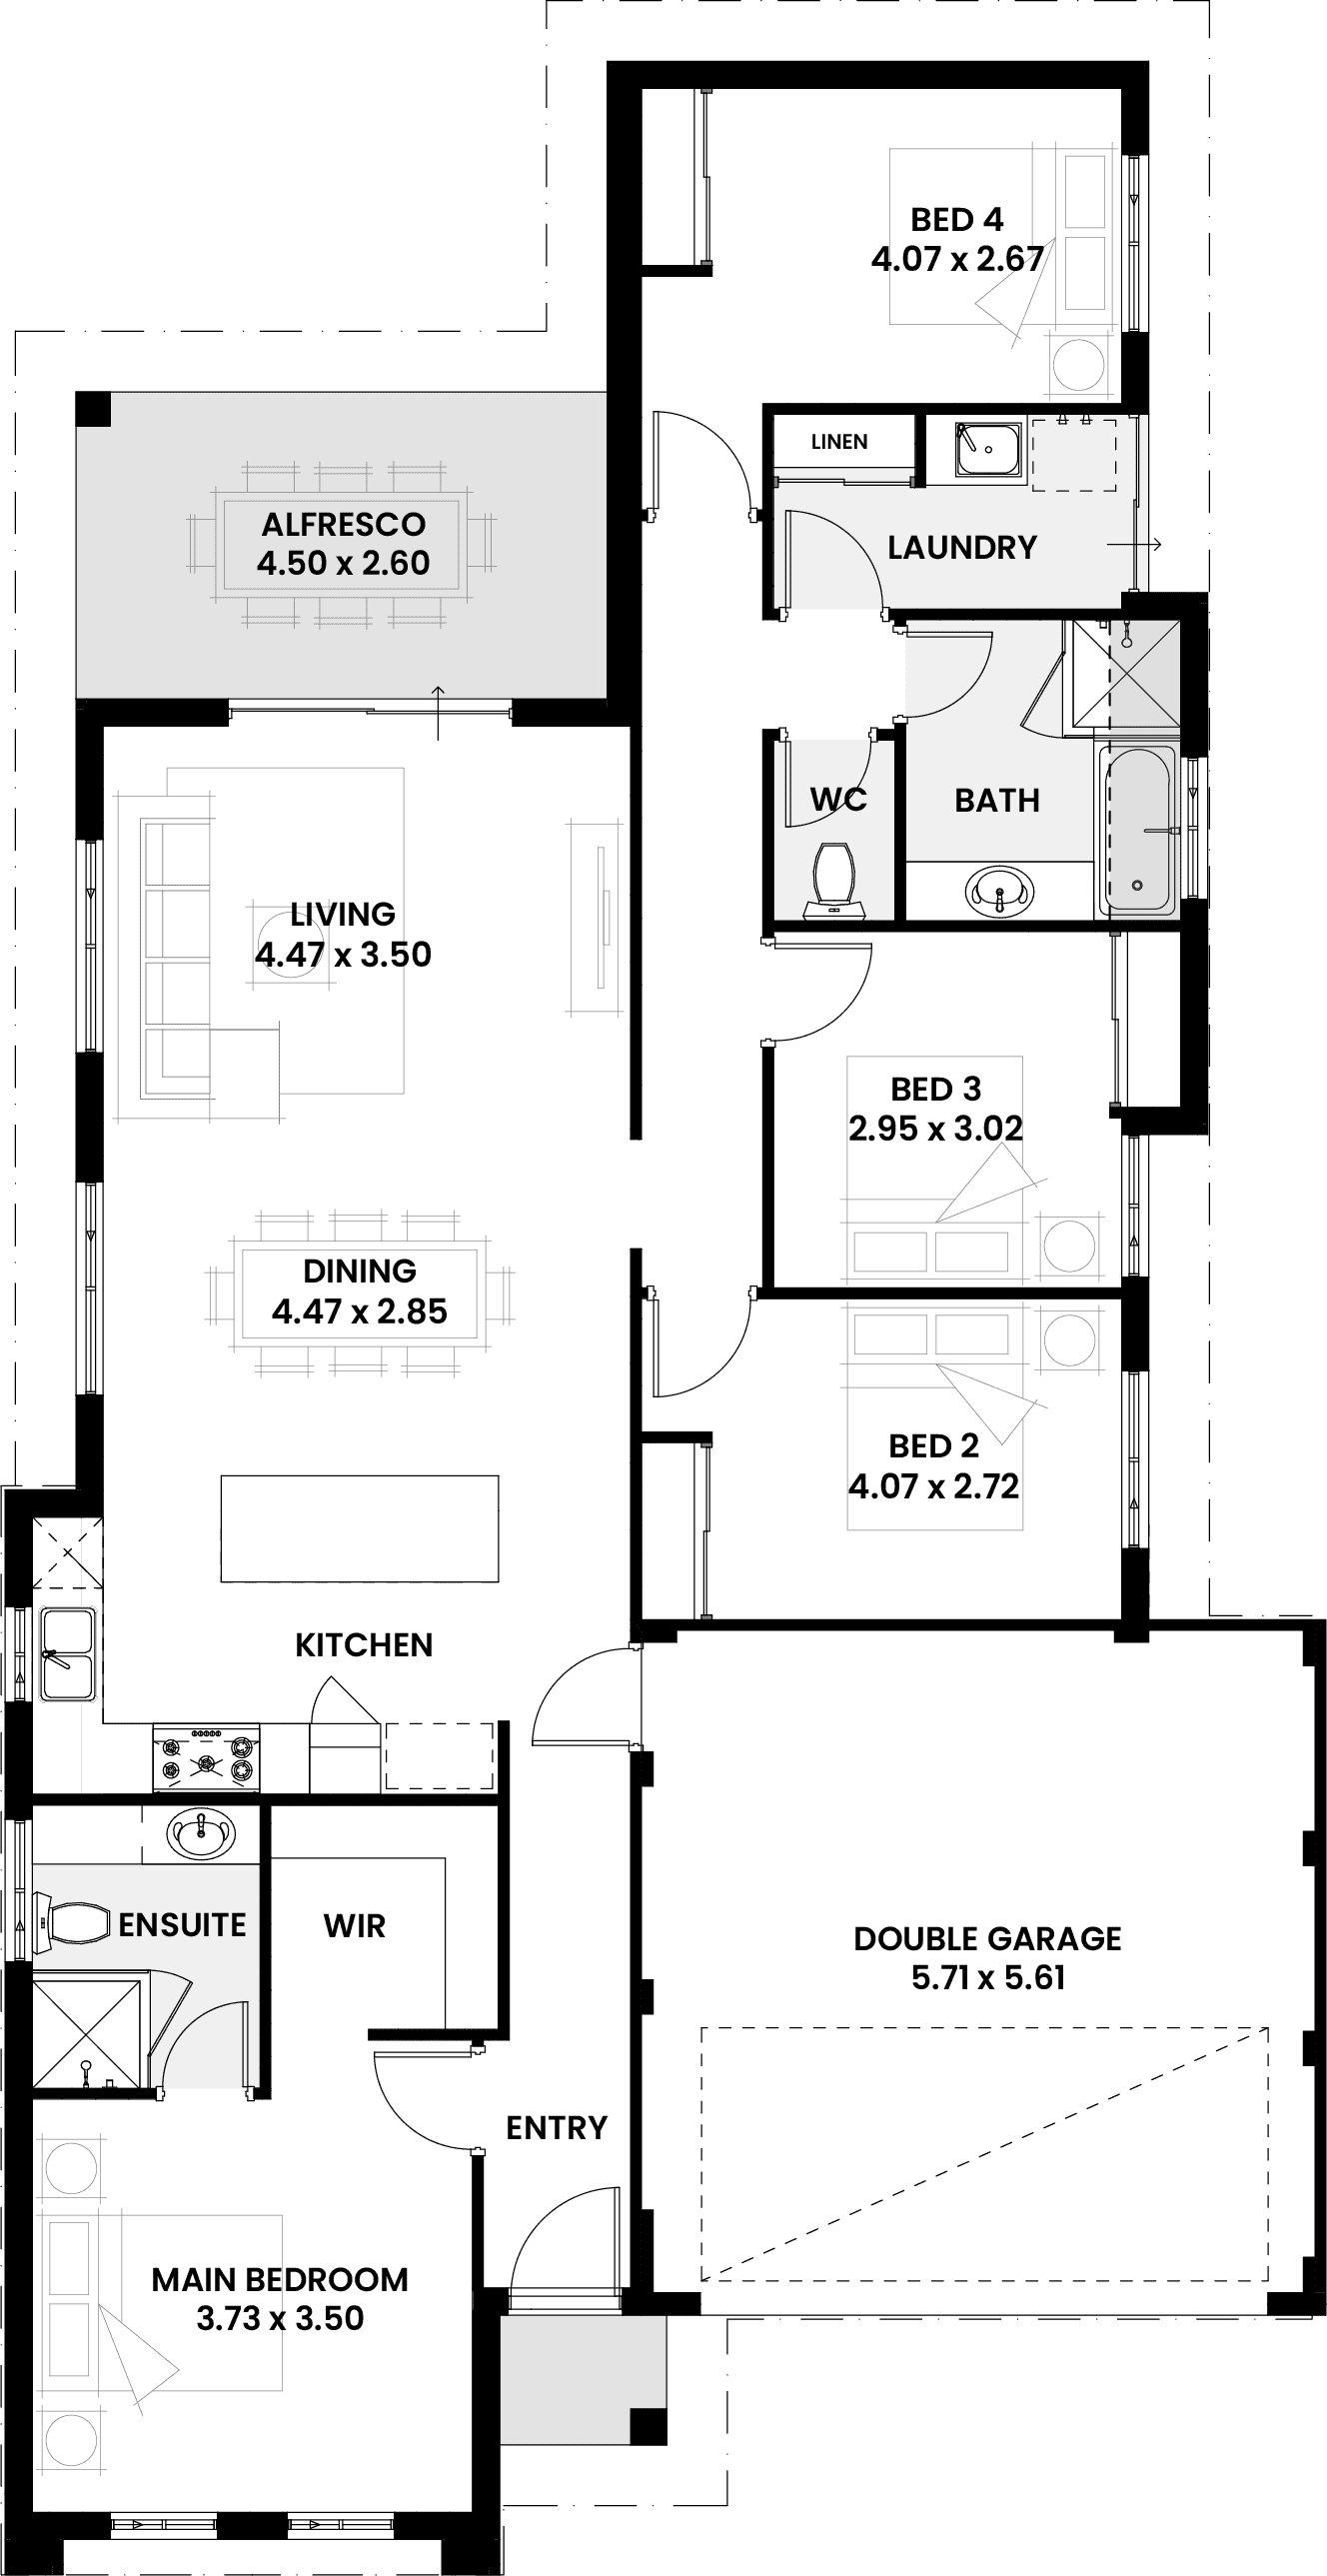 Floorplan for The Teak, a Move Homes new home design perfect for first time buyers and new builders in Perth